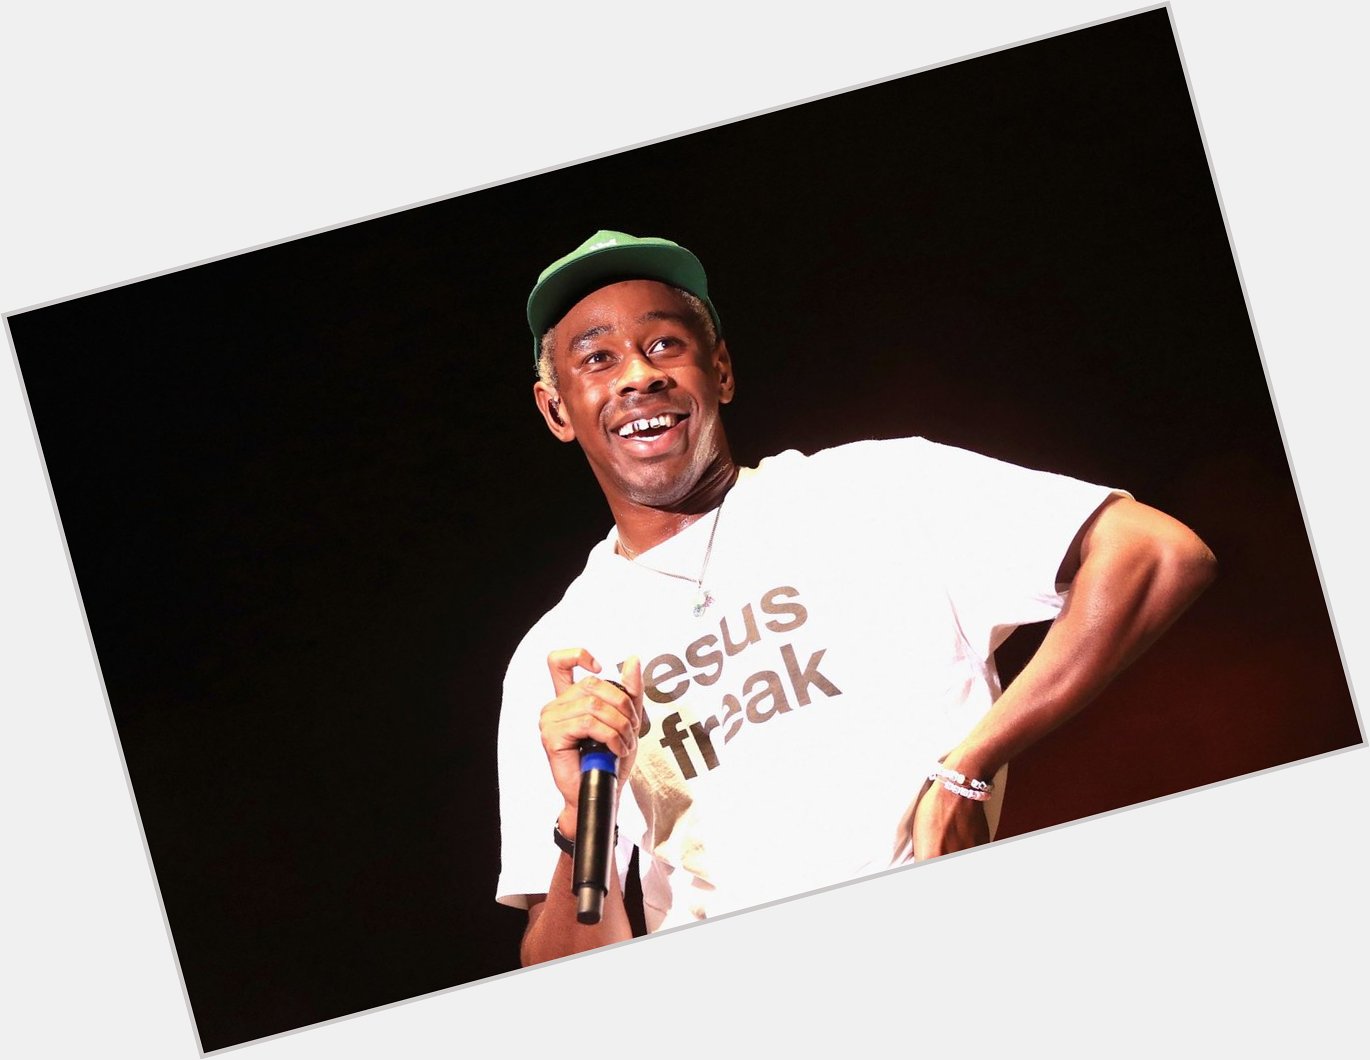 Shoutout to one of my favorite modern artists, happy 31st birthday to tyler, the creator! 